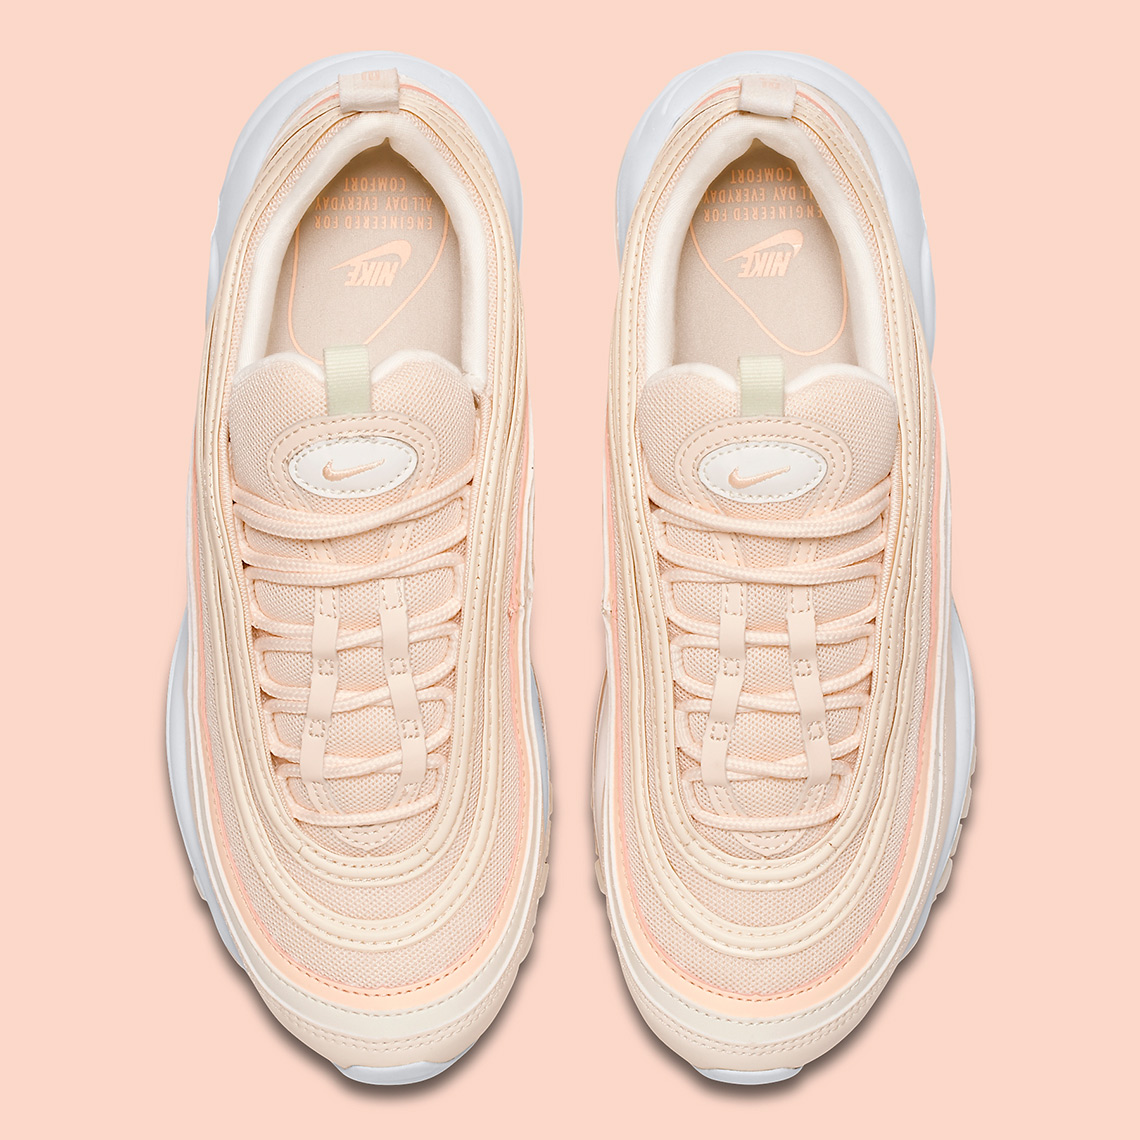 air max 97 guava ice release date